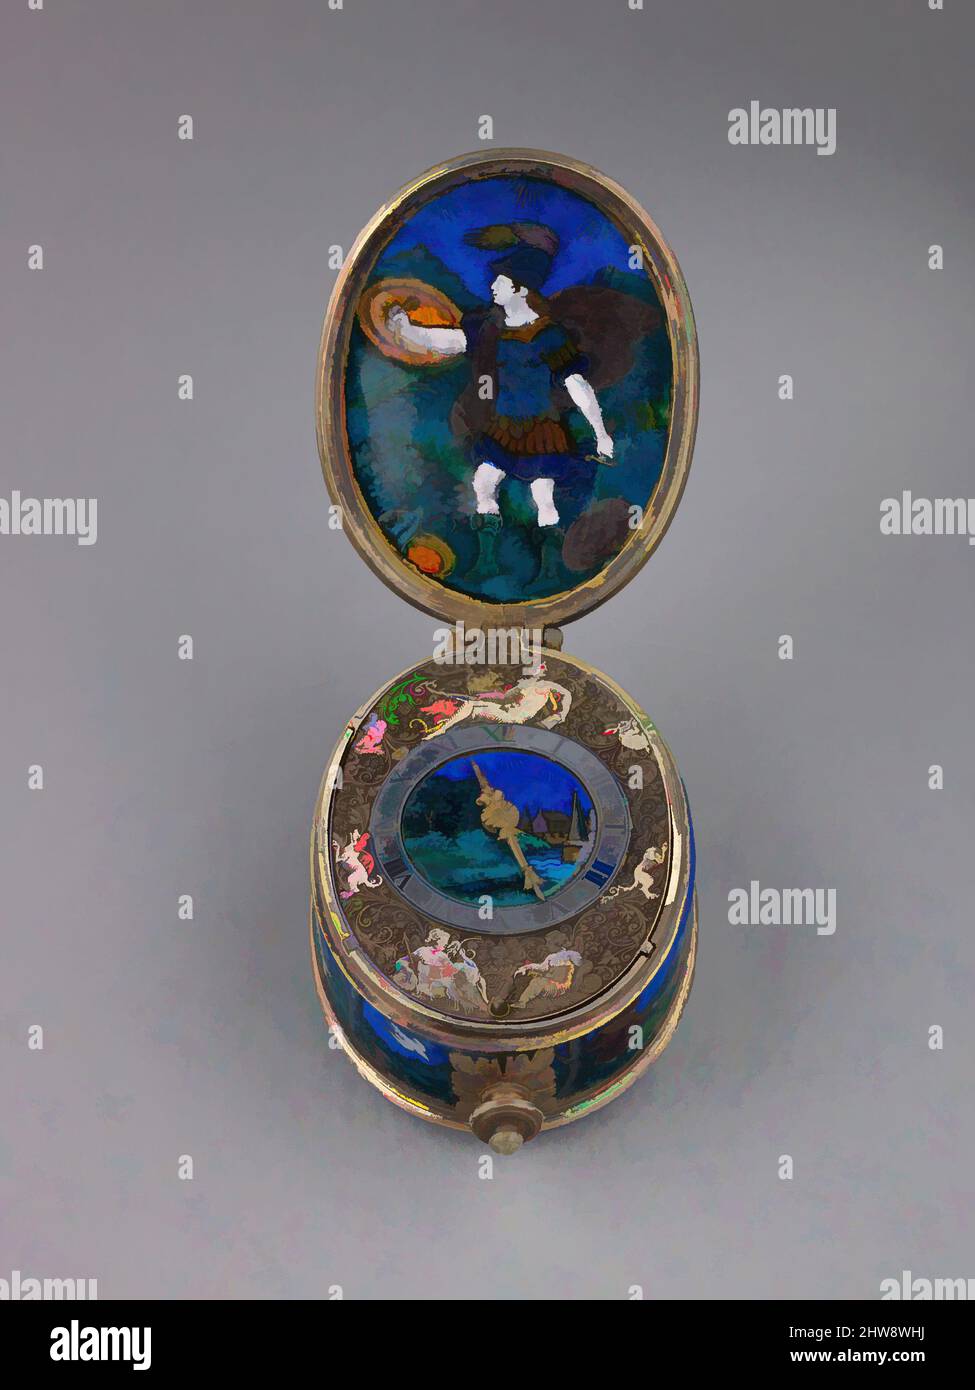 Art inspired by Watch, first quarter of 17th century, Case of brass with plaques of painted enamel on copper, partly gilt and partly silvered, and silver-gilt mounts. Dial of brass with traces of gilding and with a silver chapter of hours; in the center a disk of painted enamel on, Classic works modernized by Artotop with a splash of modernity. Shapes, color and value, eye-catching visual impact on art. Emotions through freedom of artworks in a contemporary way. A timeless message pursuing a wildly creative new direction. Artists turning to the digital medium and creating the Artotop NFT Stock Photo